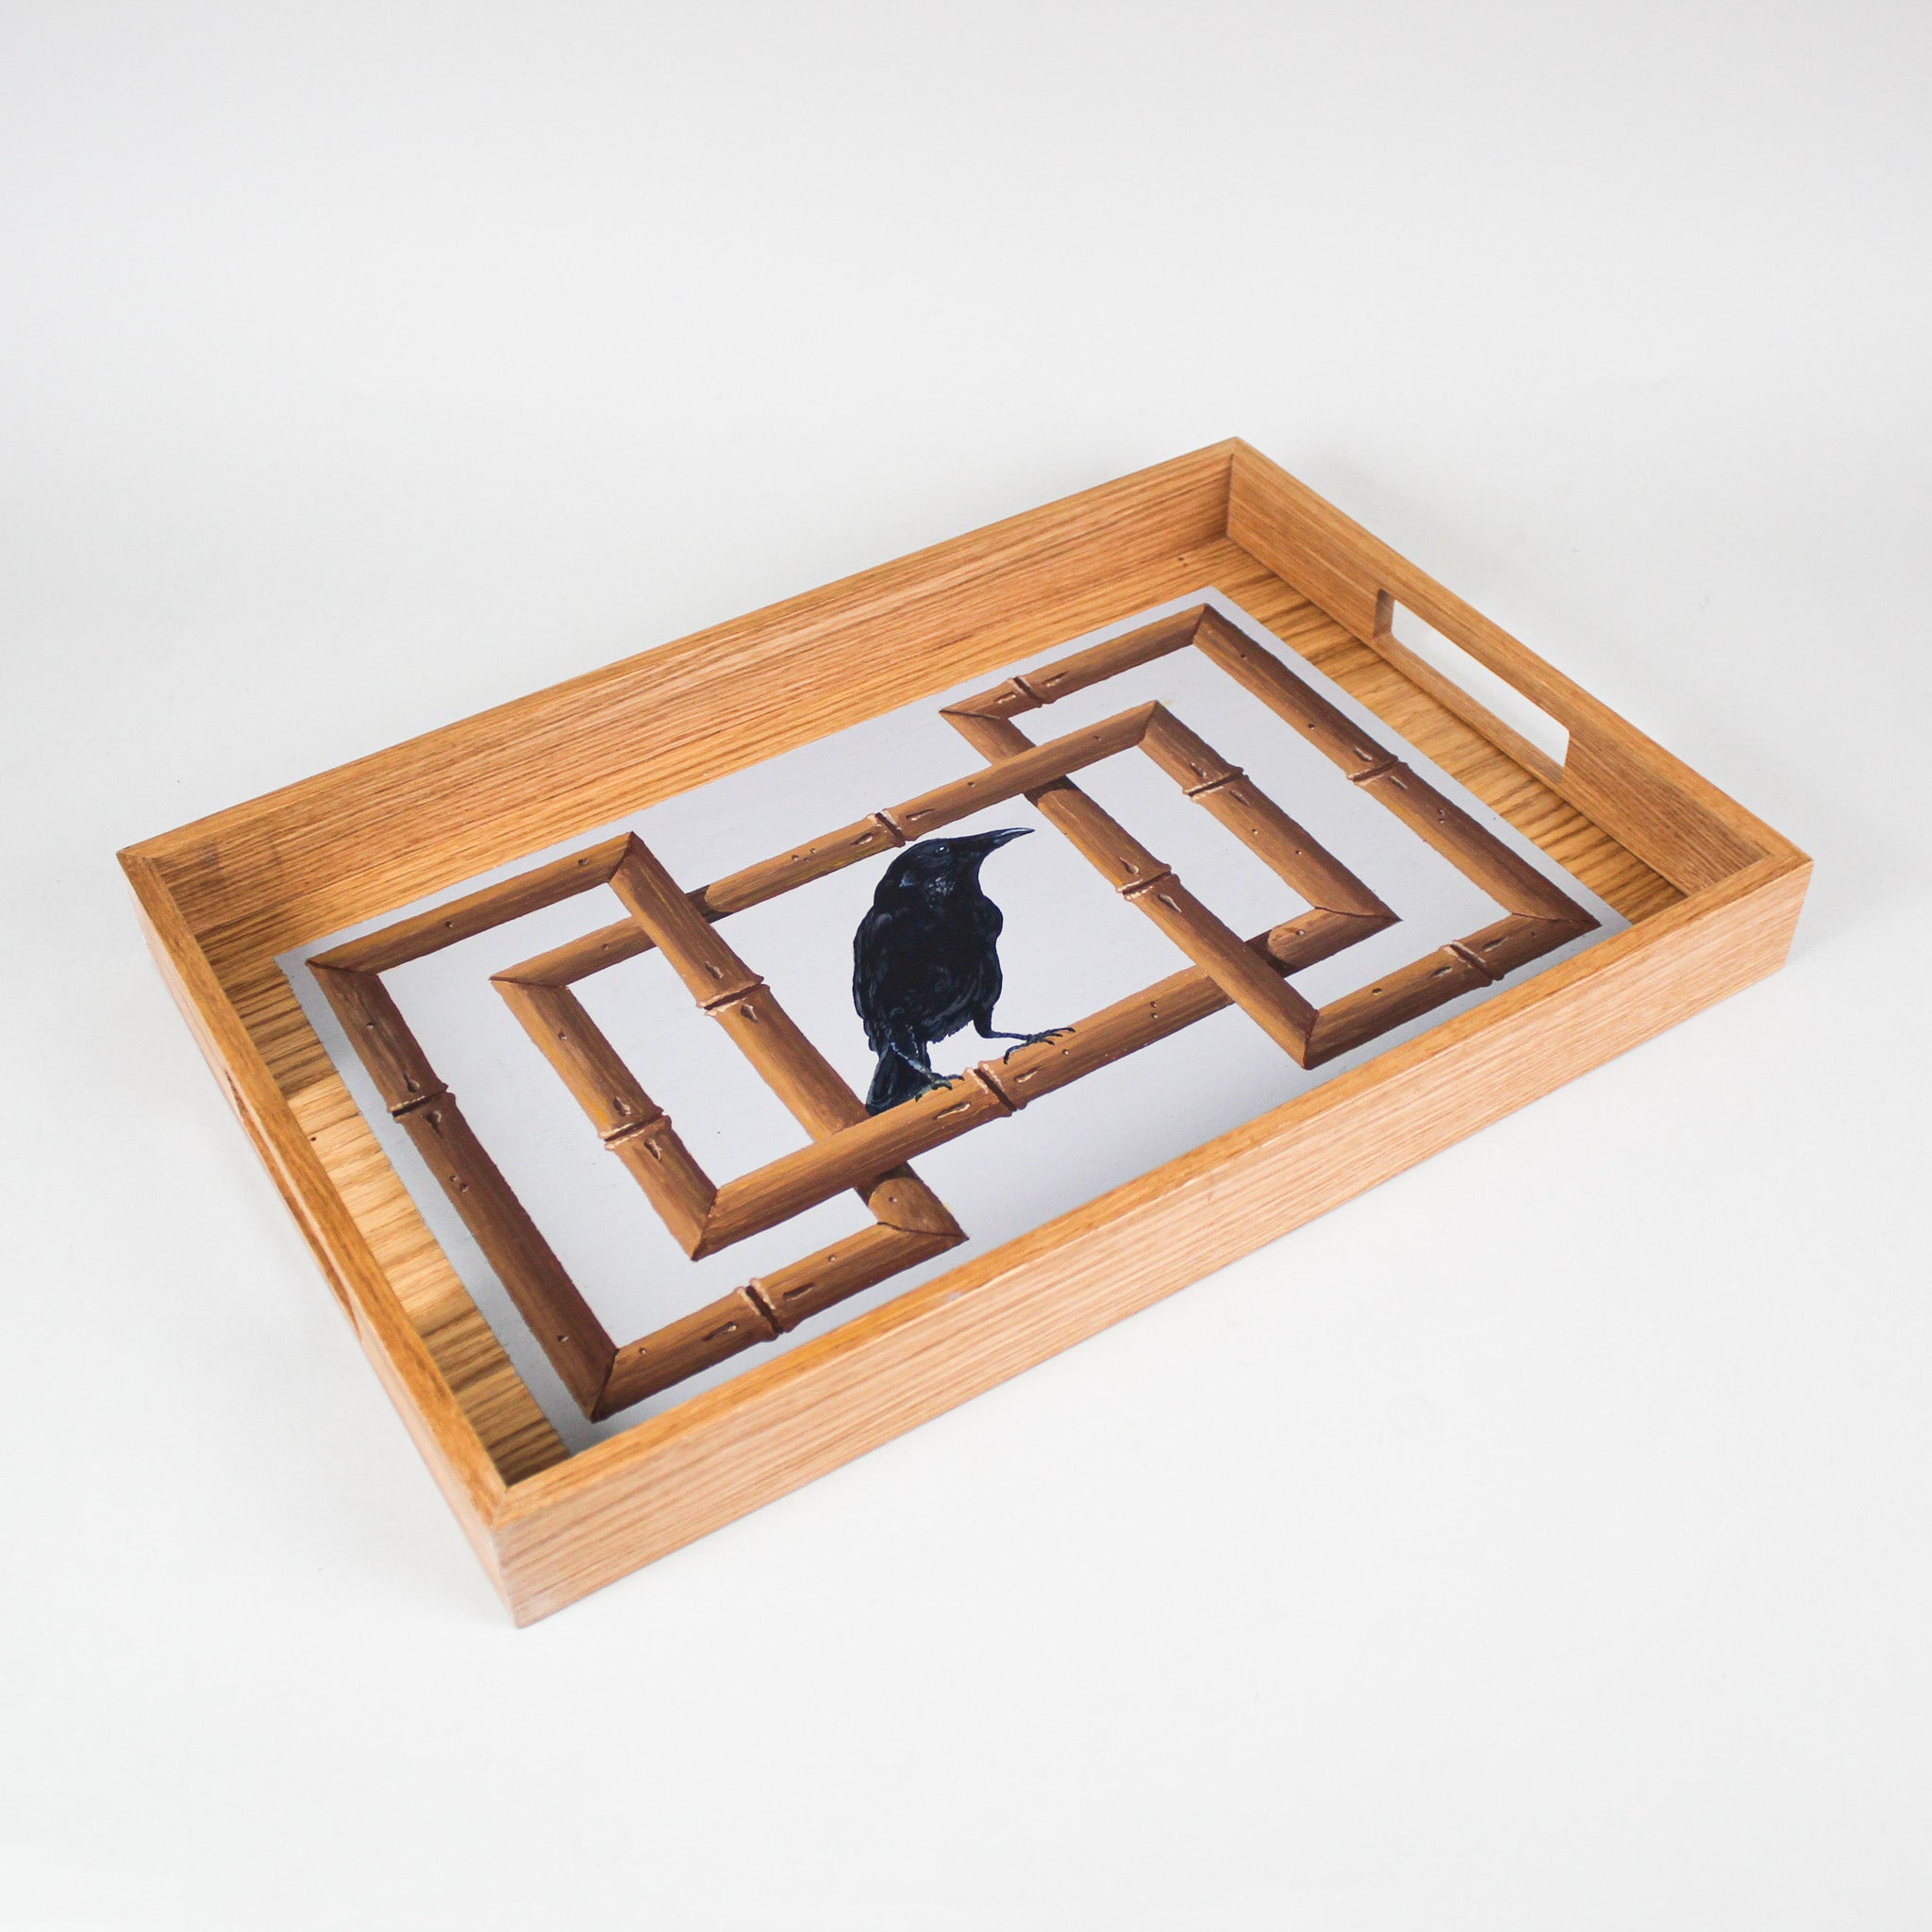 Hand-painted Wood Tray with Black Bird